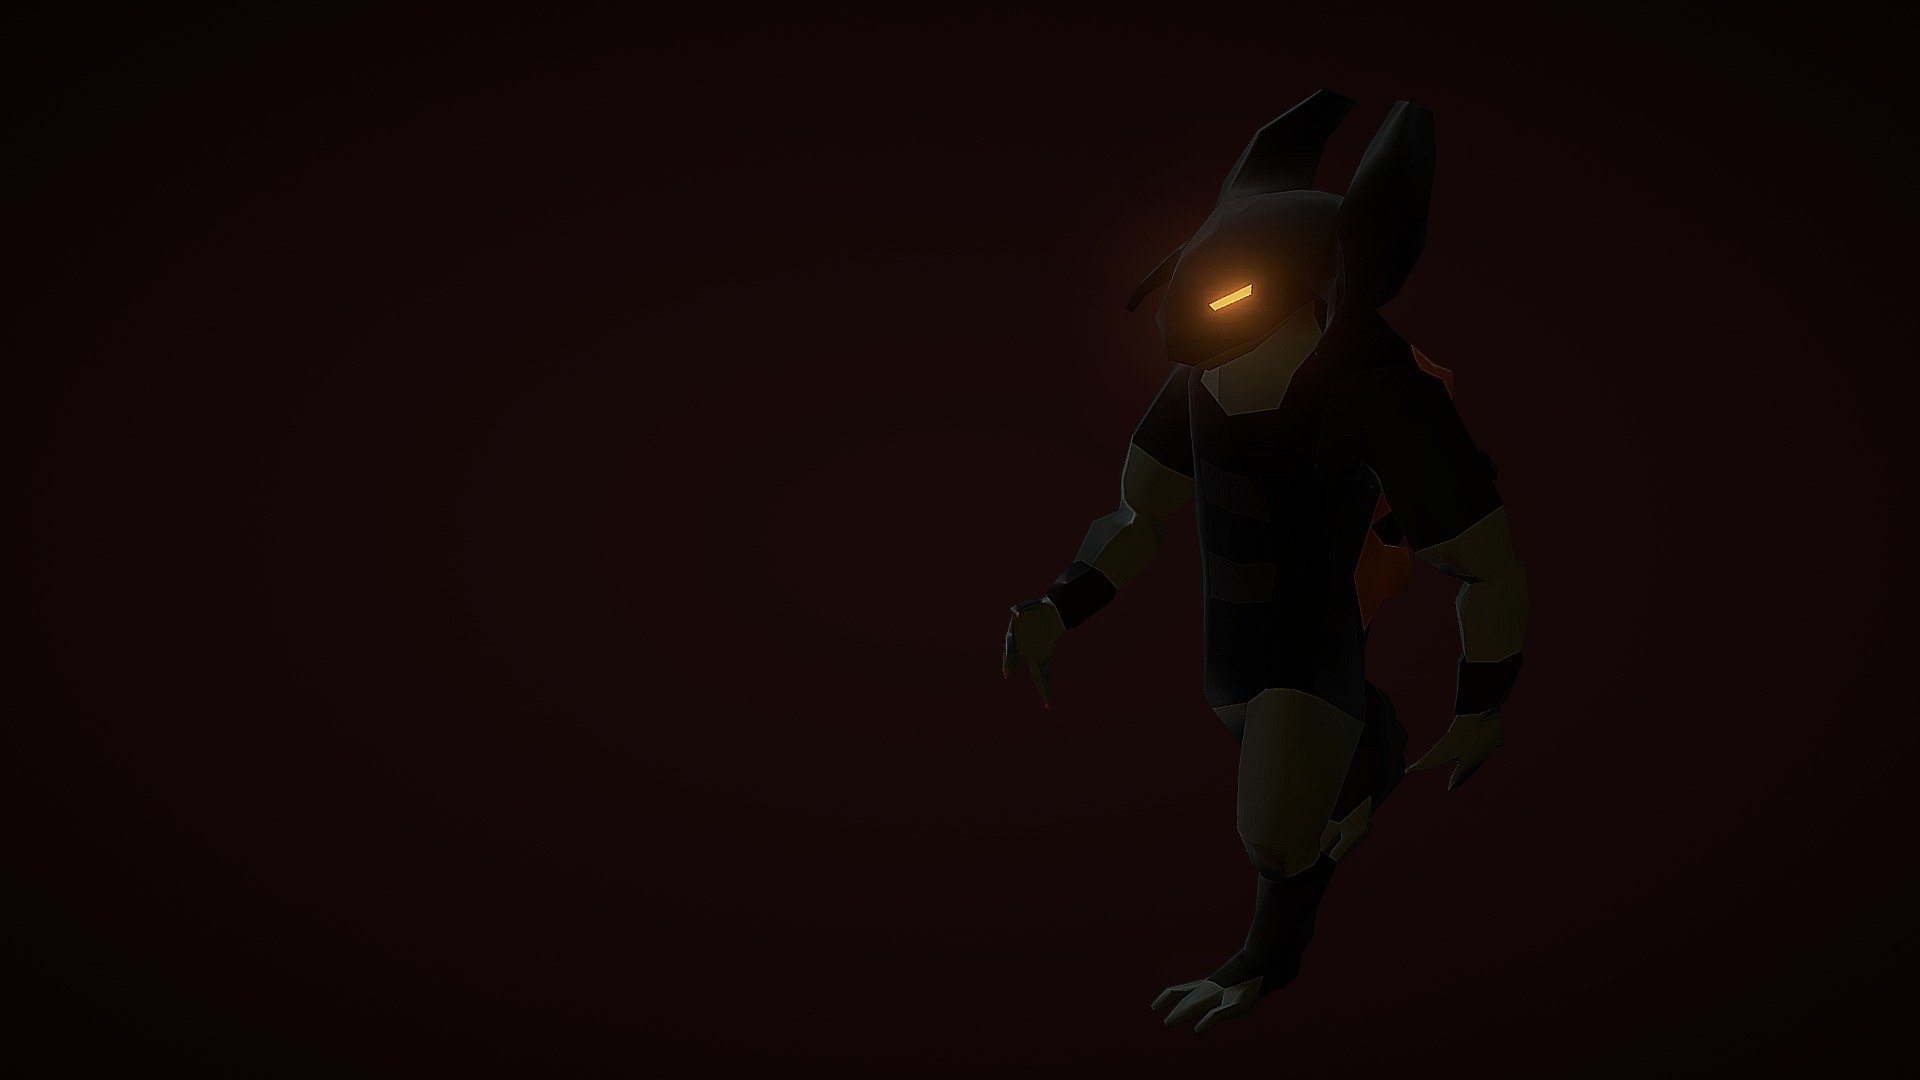 The legend of the Eclipse (Lurosseeth) was a moster that would come and terrorize the people when a solar eclipse would occur, ravashing through homes, killing heards of cattle and even carrying young children off with it.

A low poly game character with walk cycle.
He's a strange mix between a bull, bat, dragon, turtle, beaver and others wrapped up in a humanoid figure.
I would love to have High quality textures on him, but I am really bad at texturing characters, so he is only base colors&hellip; Oh well lol
But if someone would like to terxture him I'll give full credit of texturing to whoever does so, just say so in the comments :D - The Lurosseeth ("Eclipse") - Download Free 3D model by Robin Butler (@StarTrekGuy) 3d model